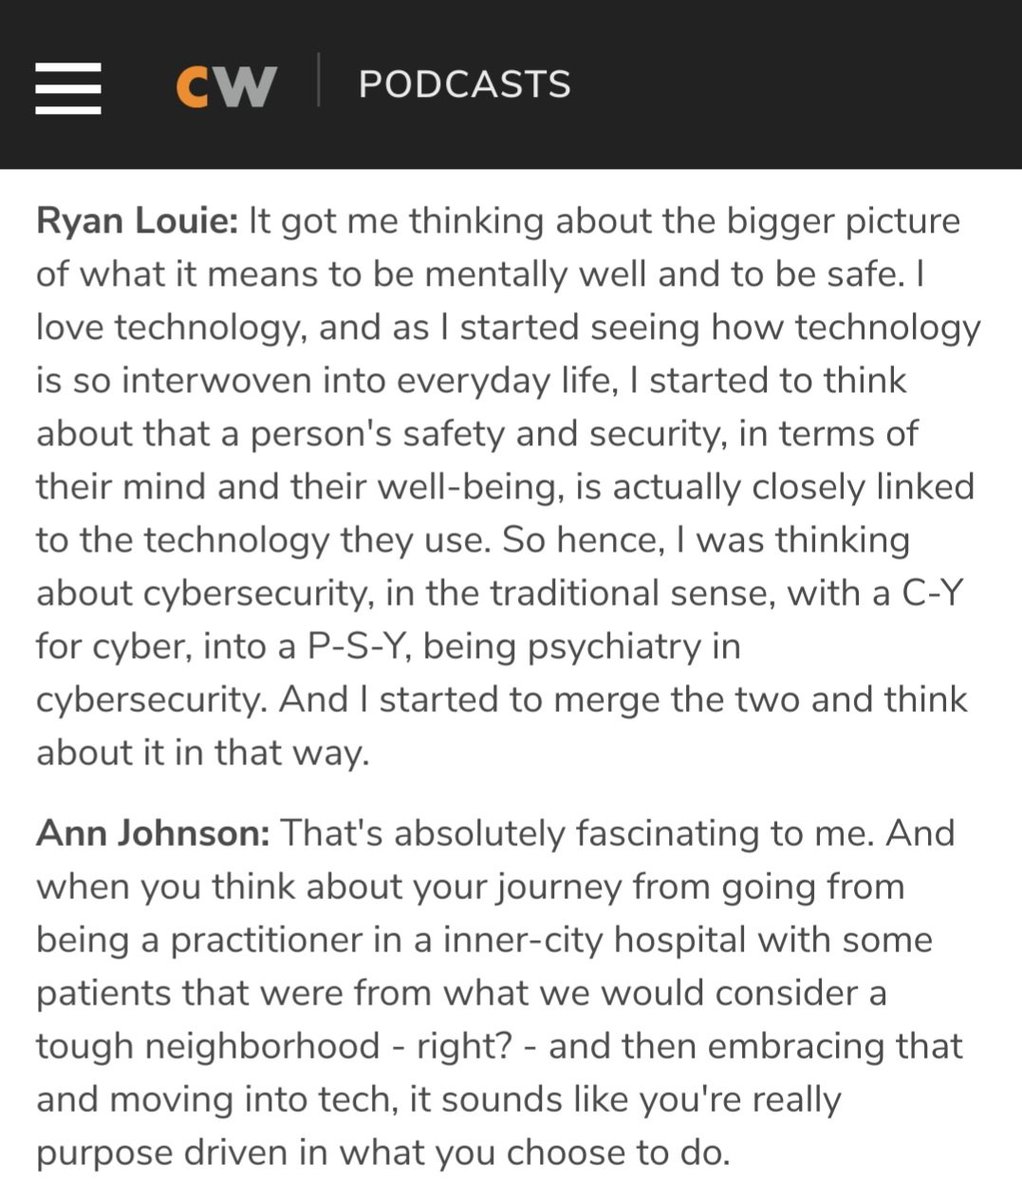 I was very happy to be invited by @ajohnsocyber on #AfternoonCyberTea this month! We talked about mental health in cybersecurity, psychiatric engineering and the mental health attack surface, and #psybersecurity. @msftsecurity @thecyberwire thecyberwire.com/podcasts/after… 🧠🛡☕️